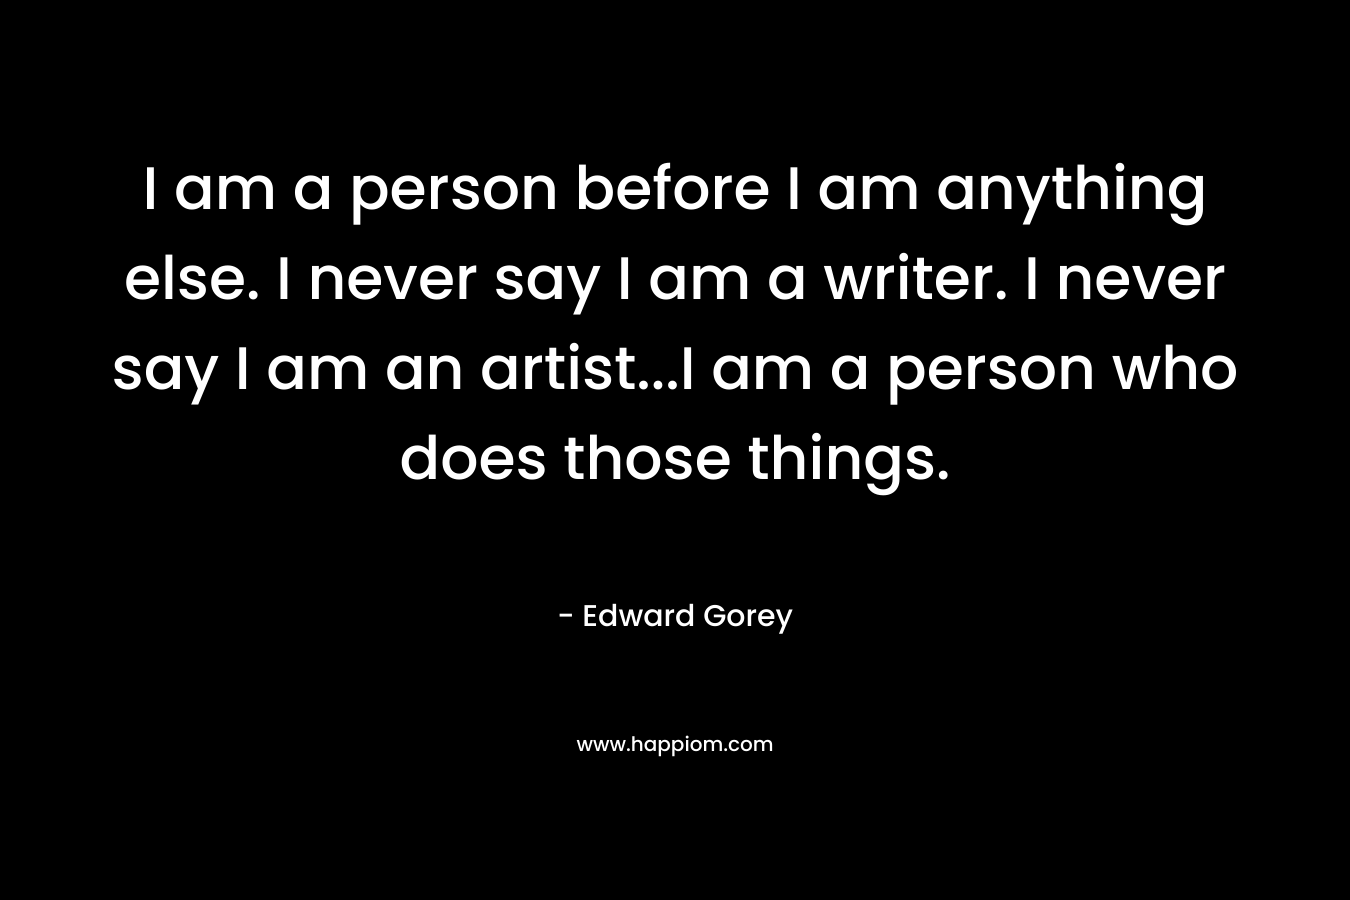 I am a person before I am anything else. I never say I am a writer. I never say I am an artist…I am a person who does those things. – Edward Gorey